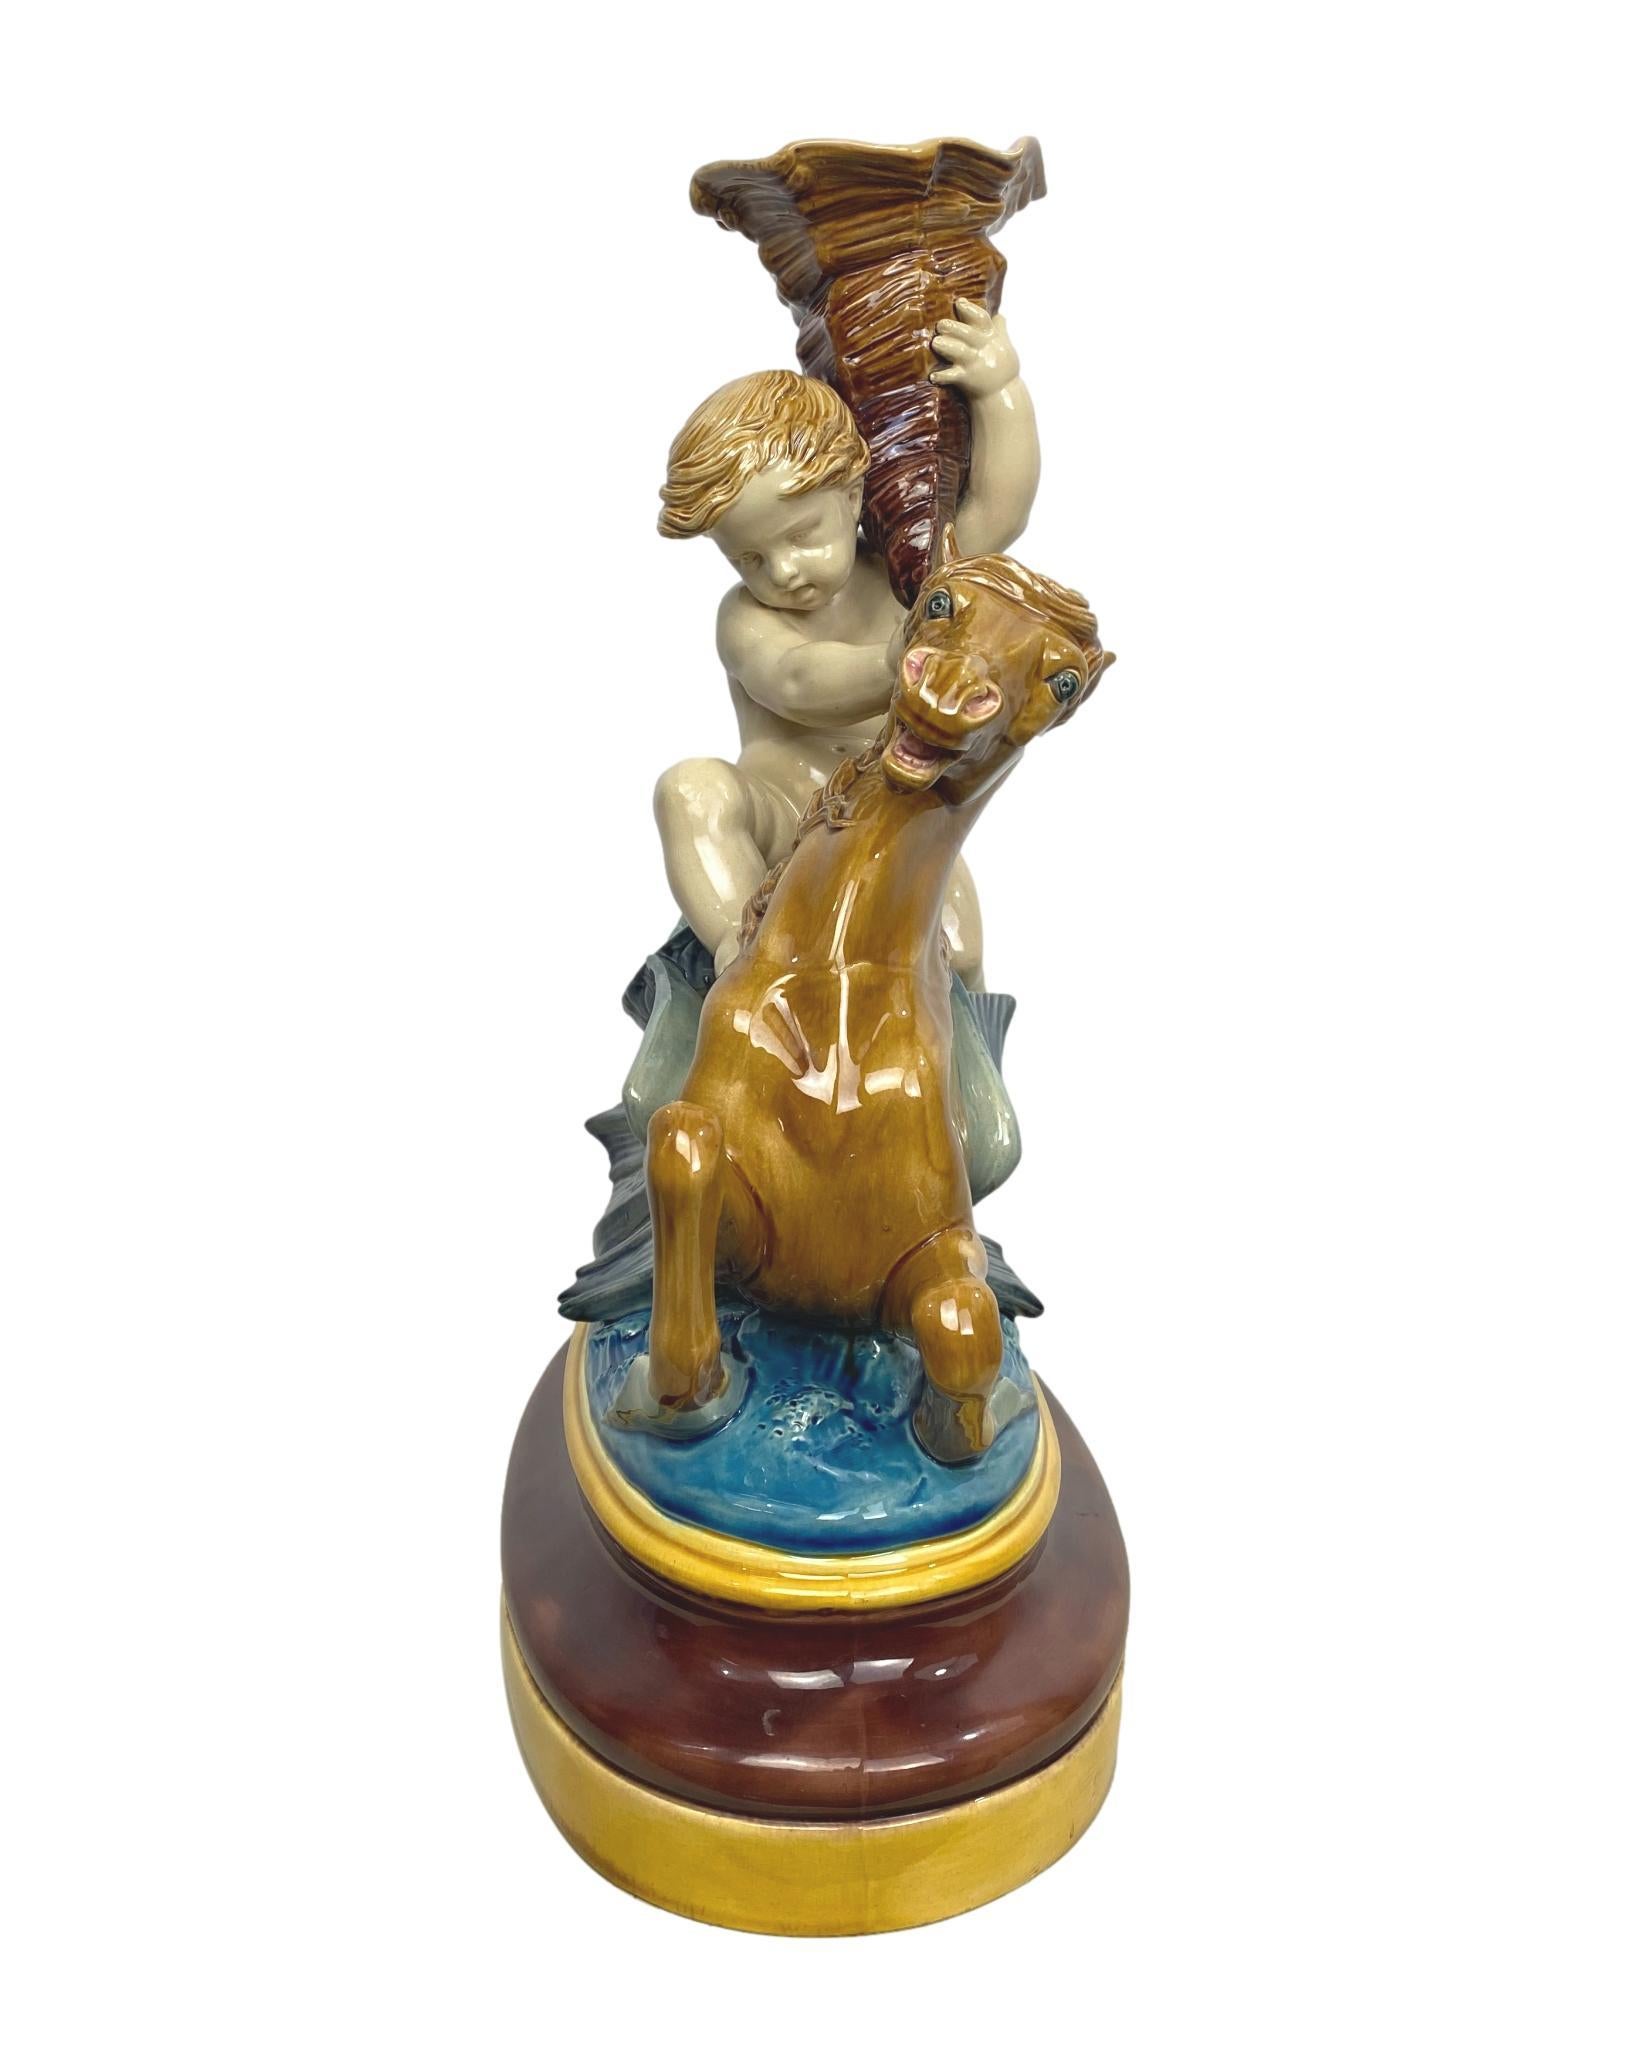 English Minton Majolica Centerpiece Putto Riding Winged Seahorse, Dated 1864, H-17ins